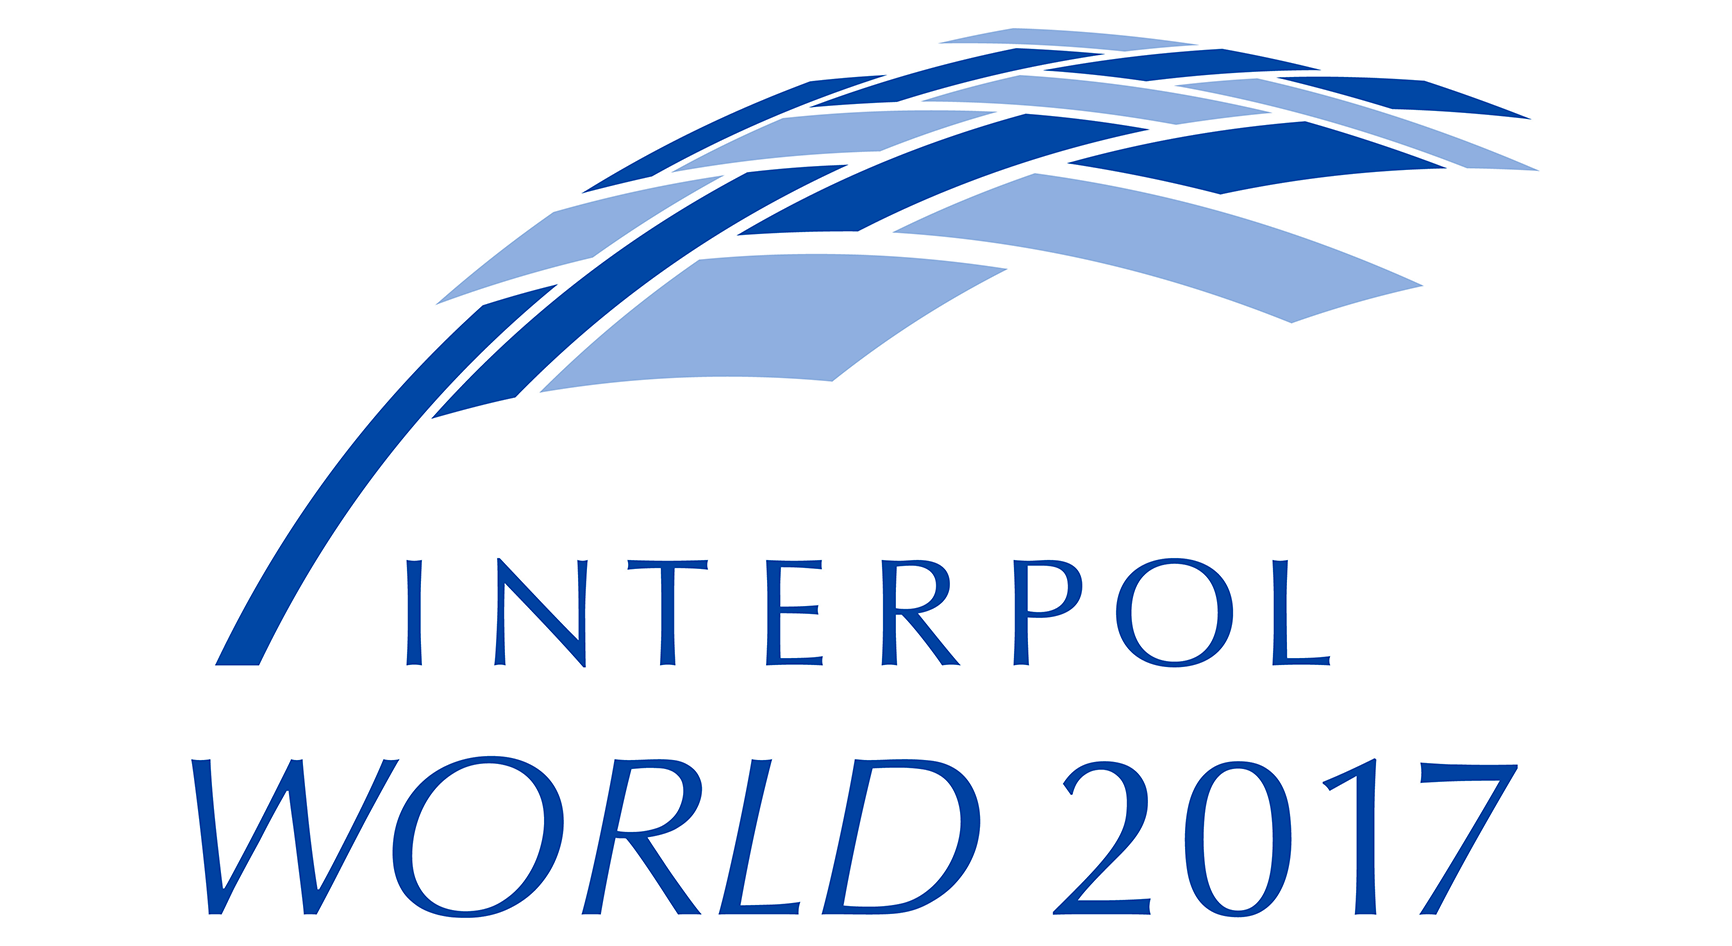 INTERPOL World 2017: Fostering Innovation for Future Security Challenges